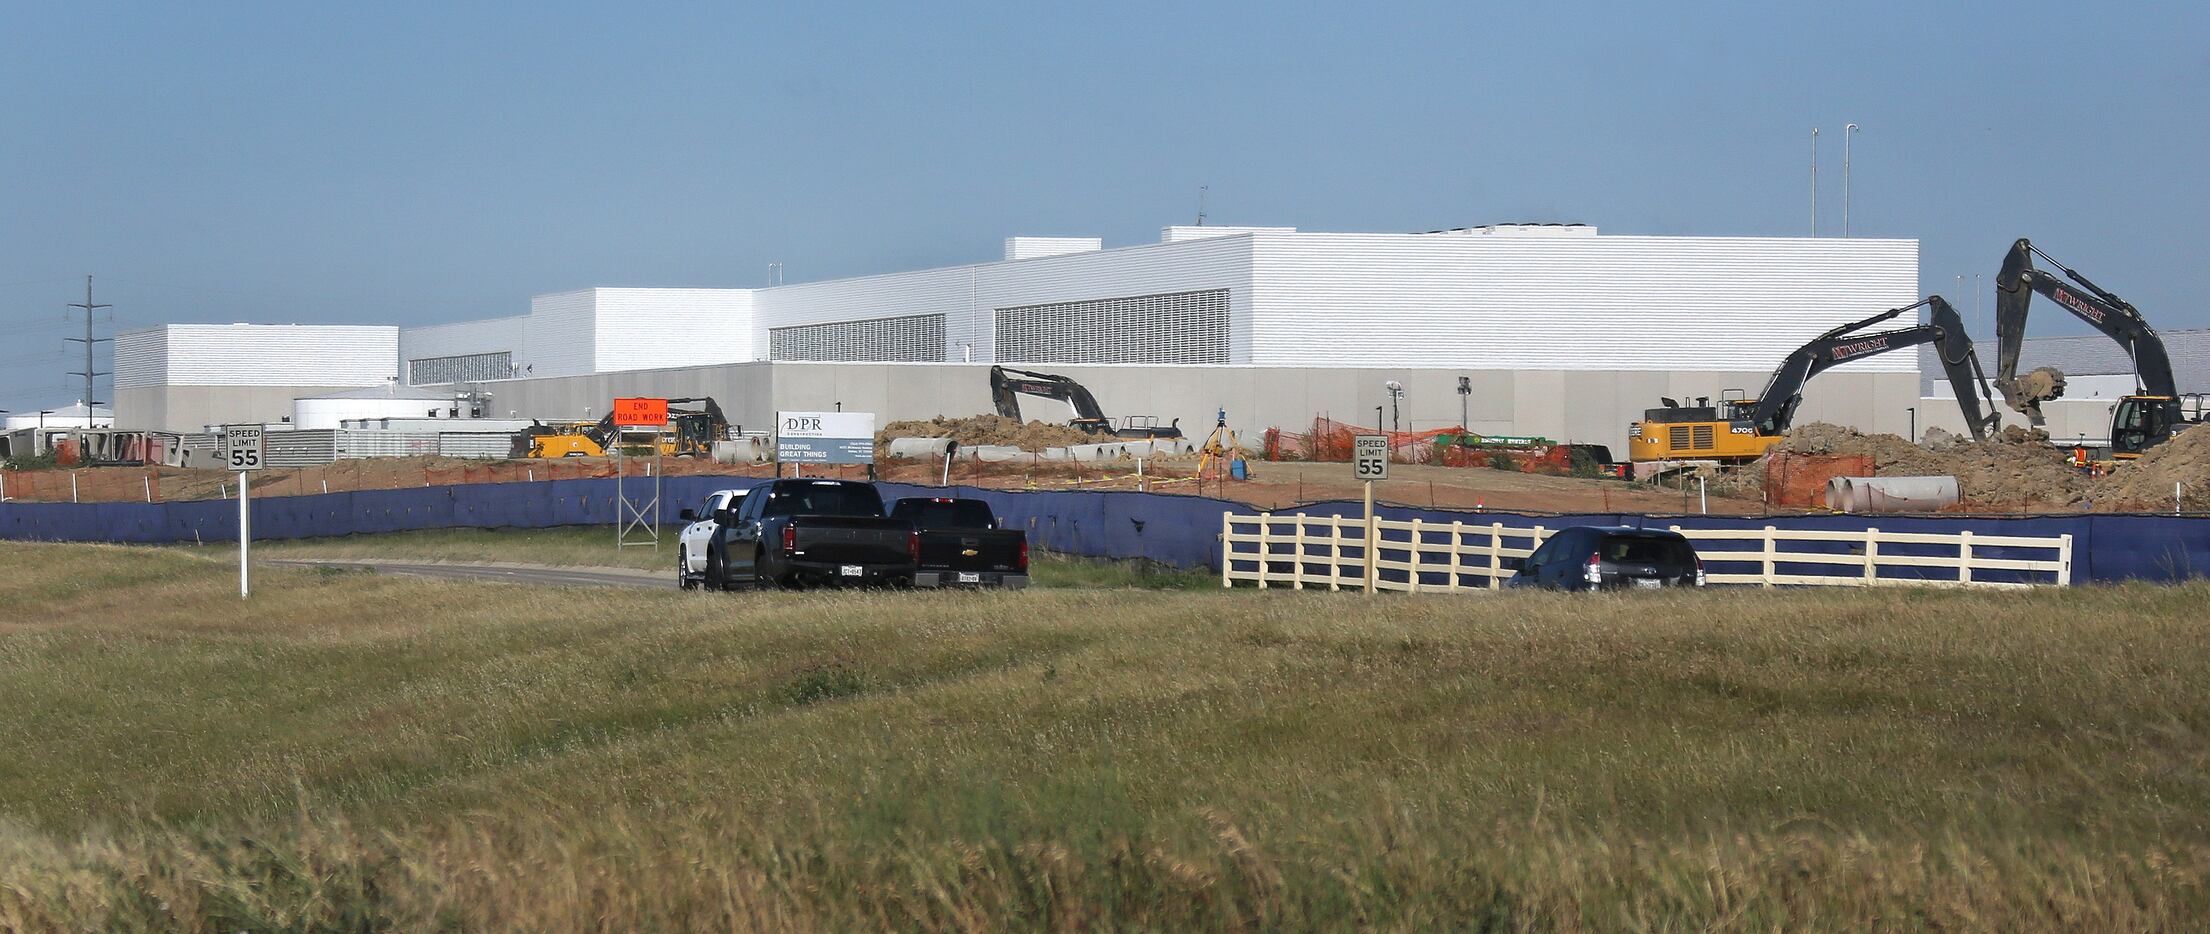 Construction has started on the third phase of Facebook's Fort Worth Data Center, as seen...